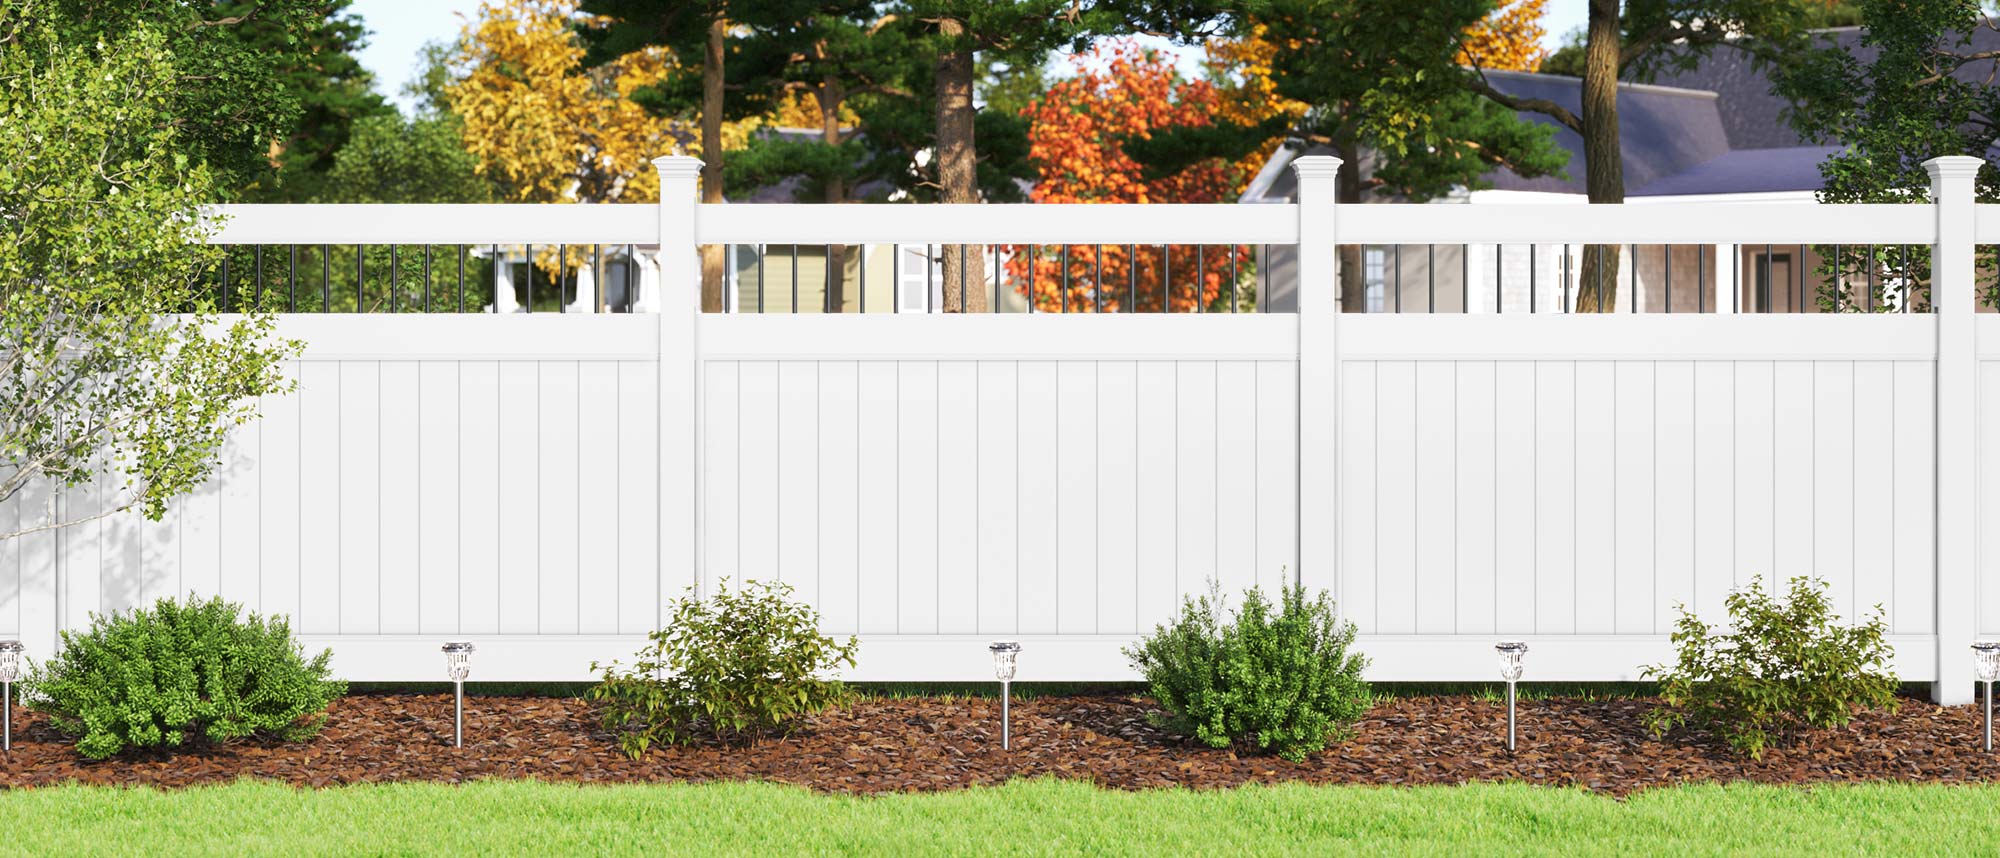 Evansville Indiana Vinyl Security Fence - Persimmon Style